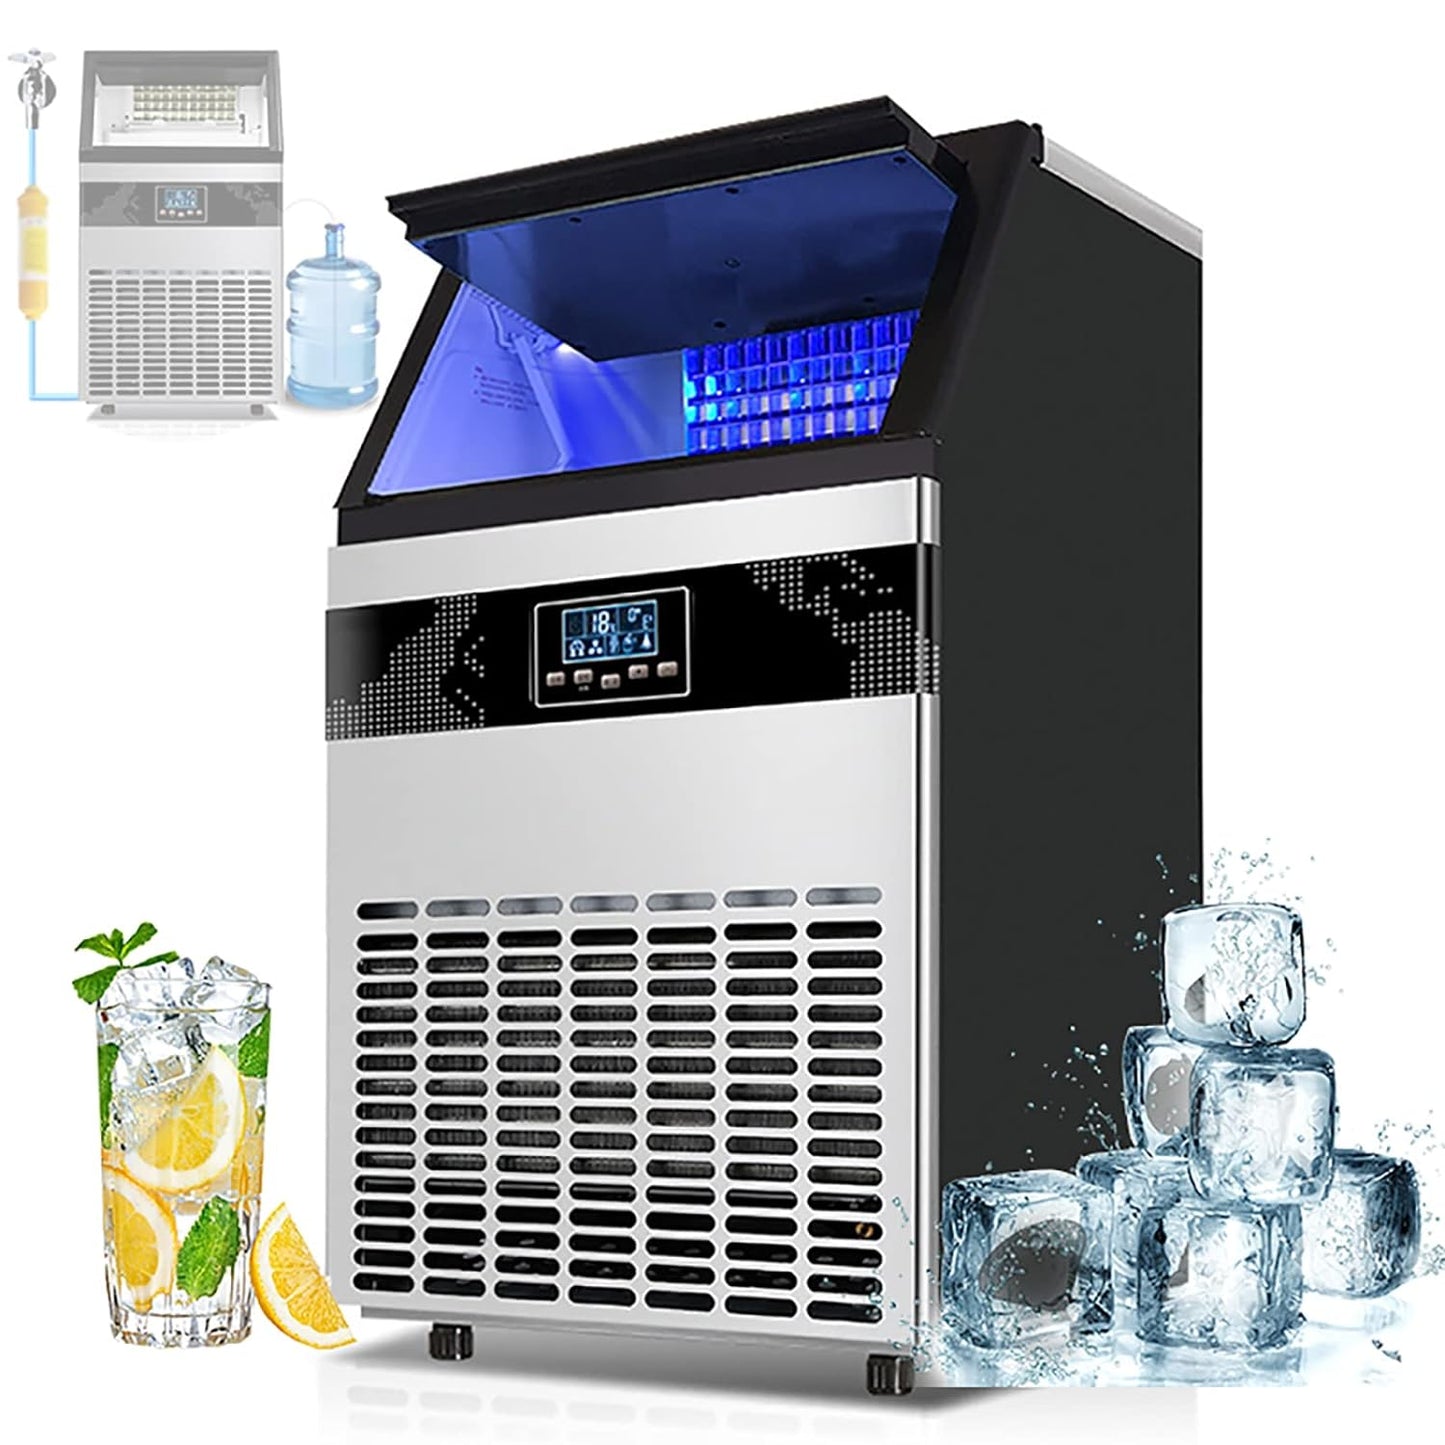 COOLBABY YLY2054 Premium Stainless Steel Ice Maker: Smart, Safe, and Efficient - COOLBABY